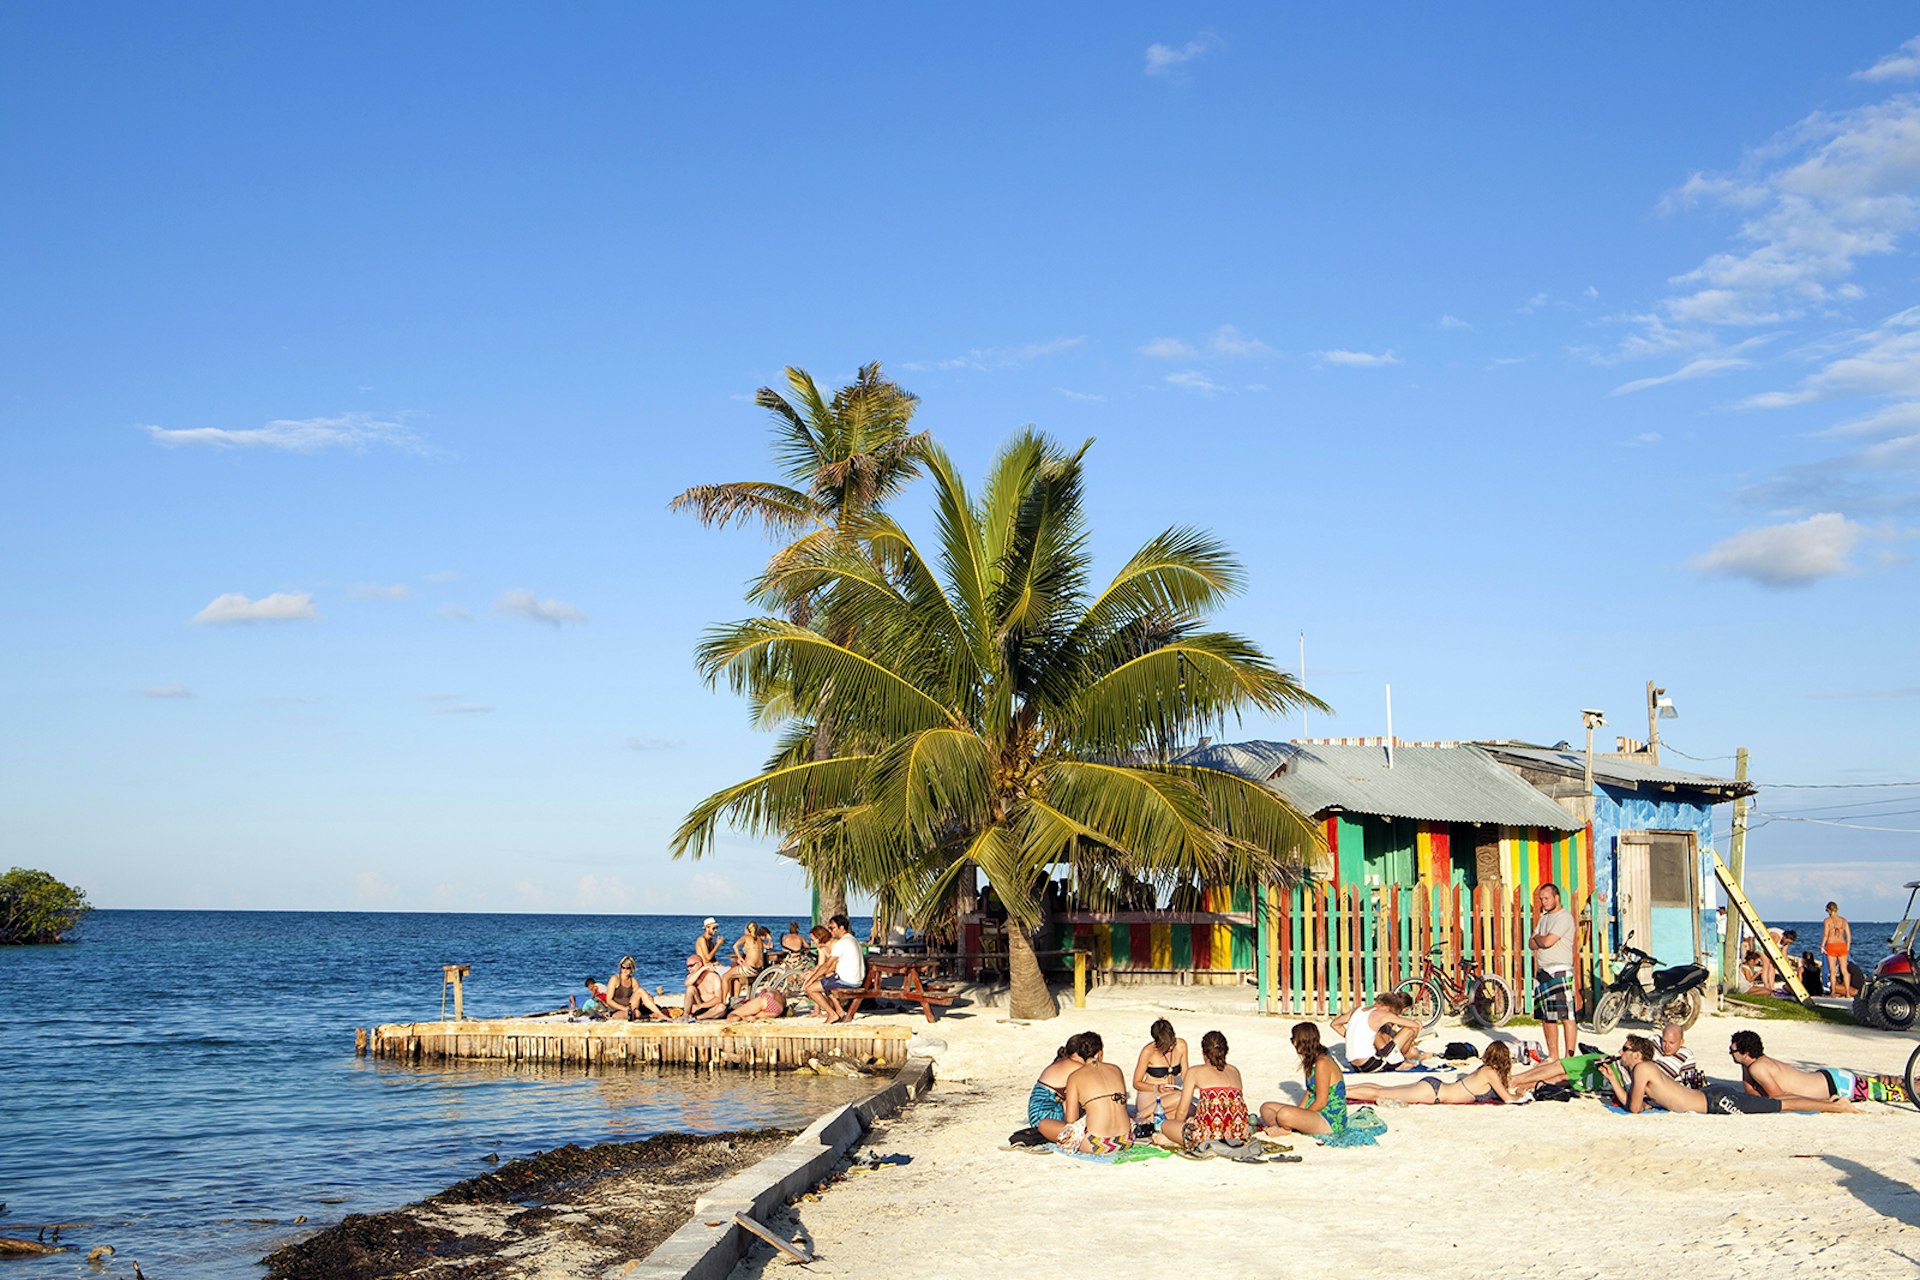 People sit on the small beach outside the Lazy Lizard bar © Alex Robinson / Getty Images